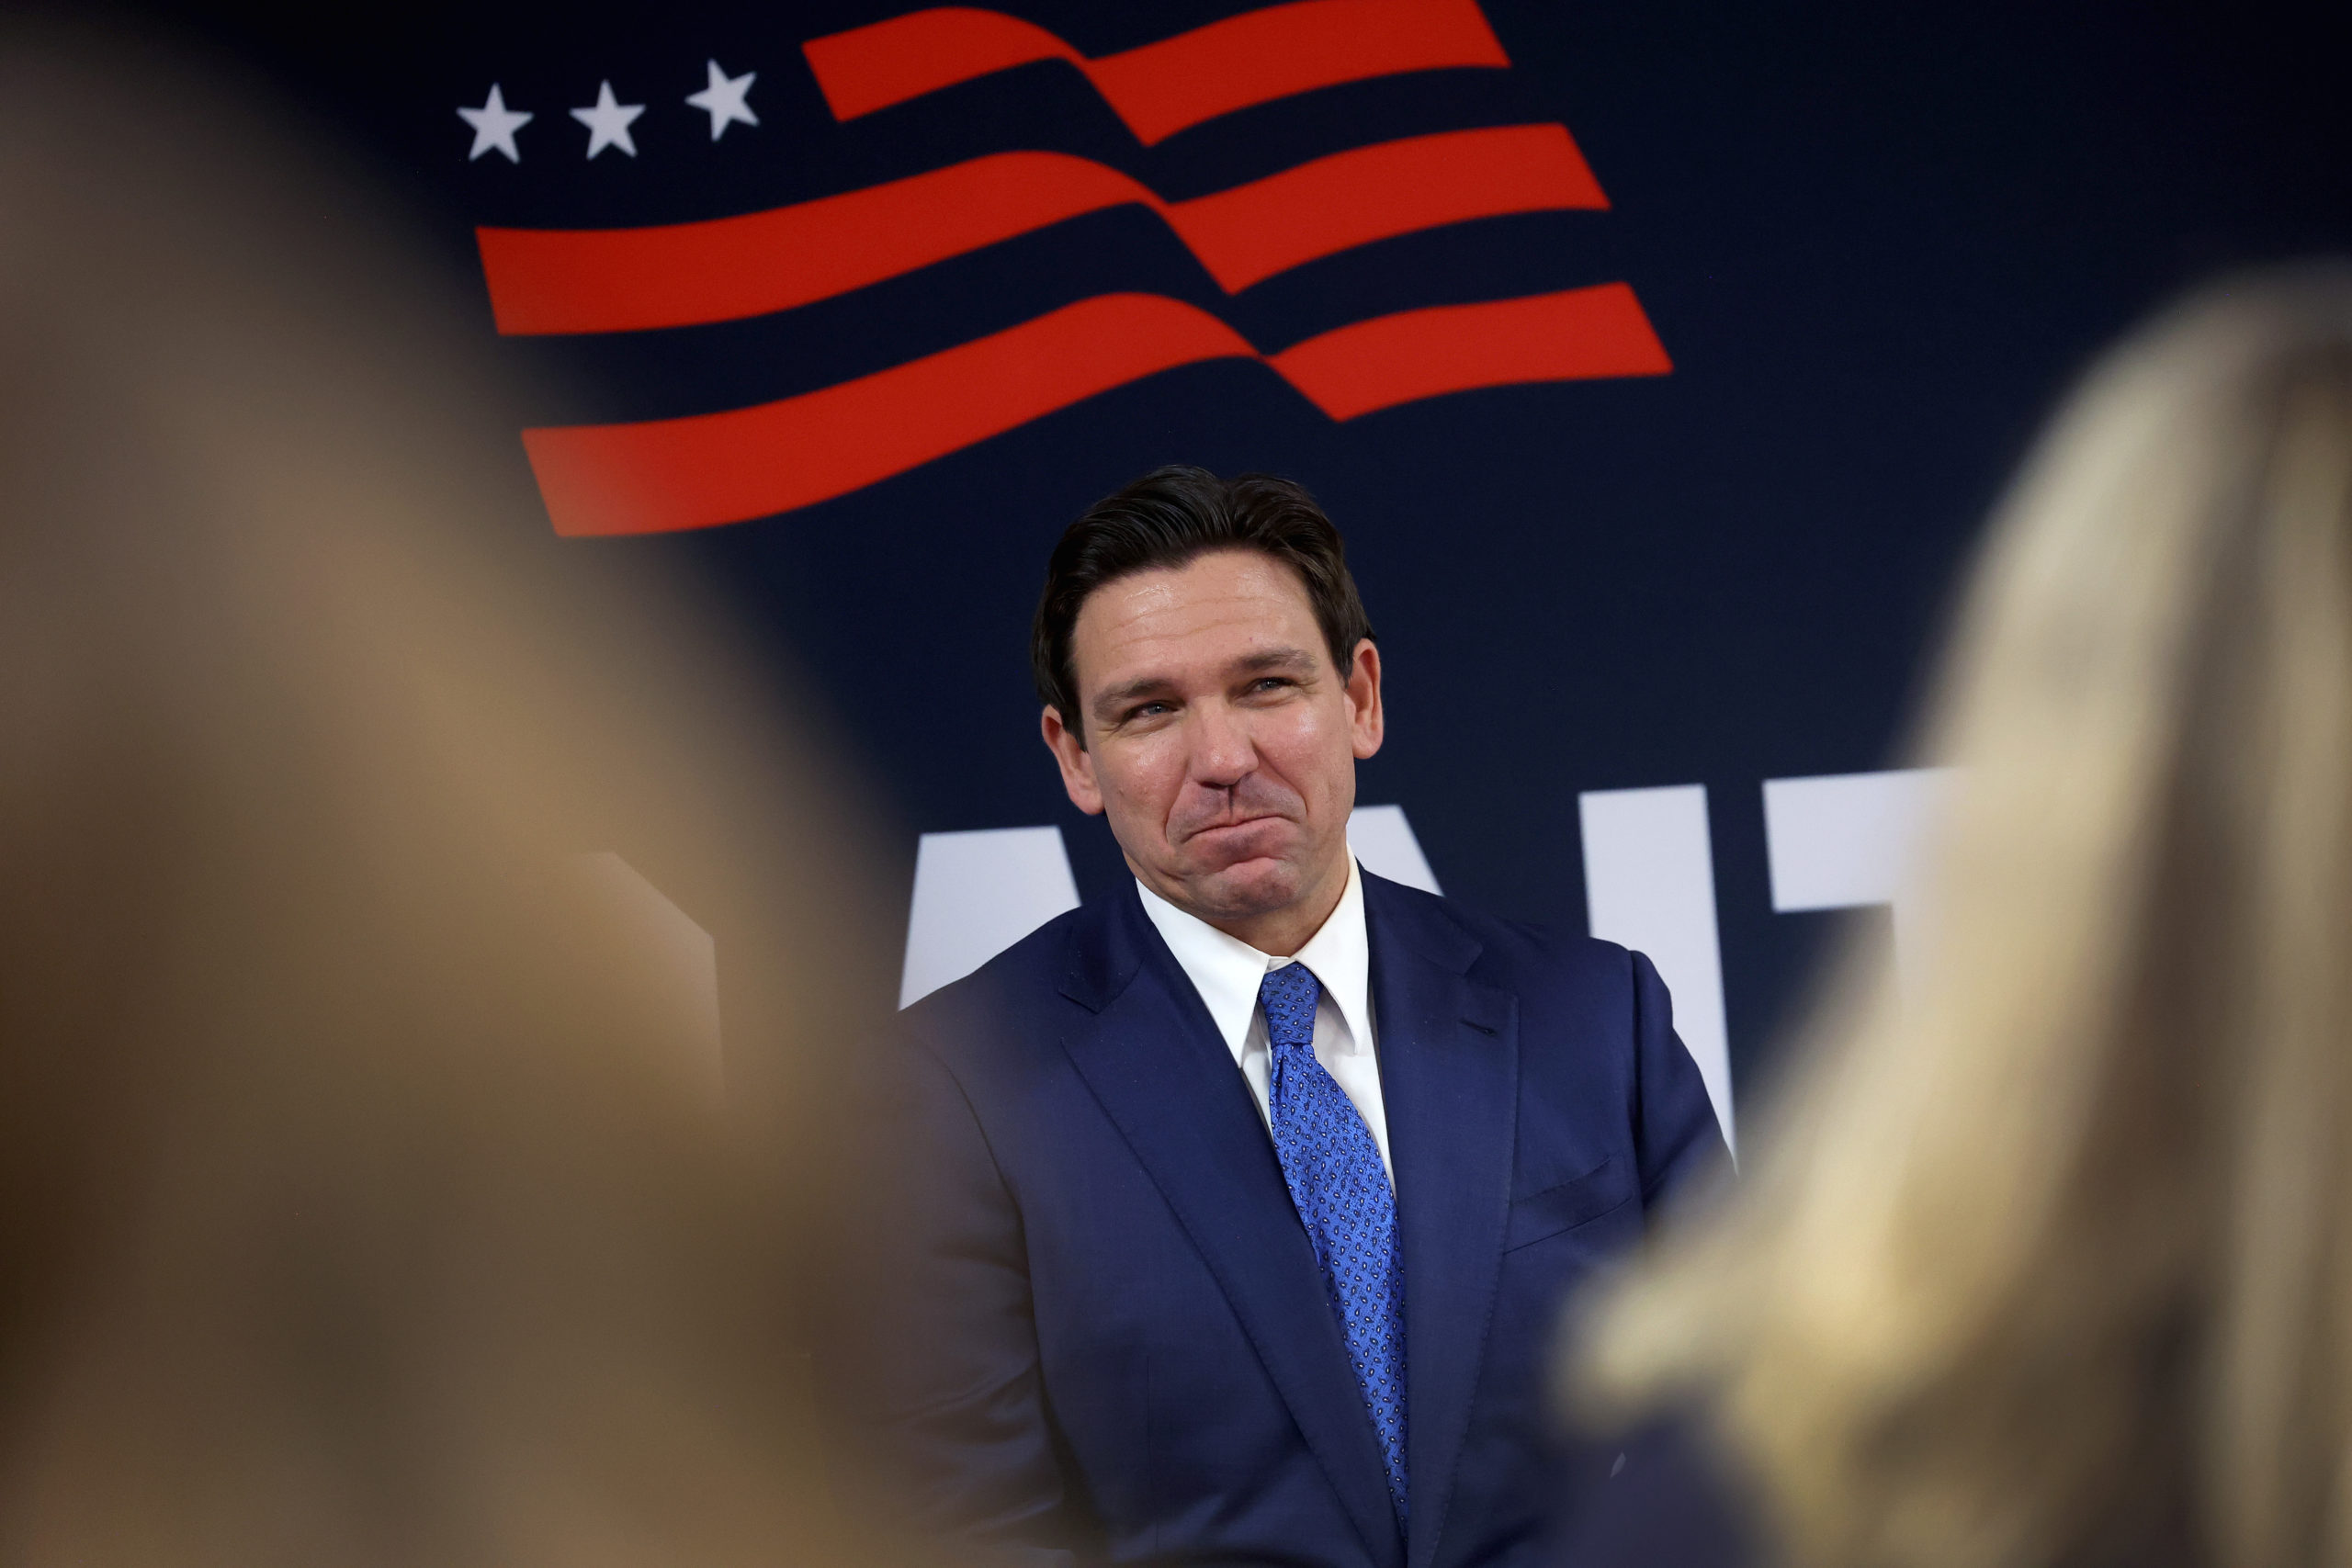 BETTENDORF, IOWA - DECEMBER 18: Republican presidential candidate Florida Governor Ron DeSantis speaks to guests during the Scott County Fireside Chat at the Tanglewood Hills Pavilion on December 18, 2023 in Bettendorf, Iowa. Iowa Republicans will be the first to select their party's nomination for the 2024 presidential race when they go to caucus on January 15, 2024. (Photo by Scott Olson/Getty Images)